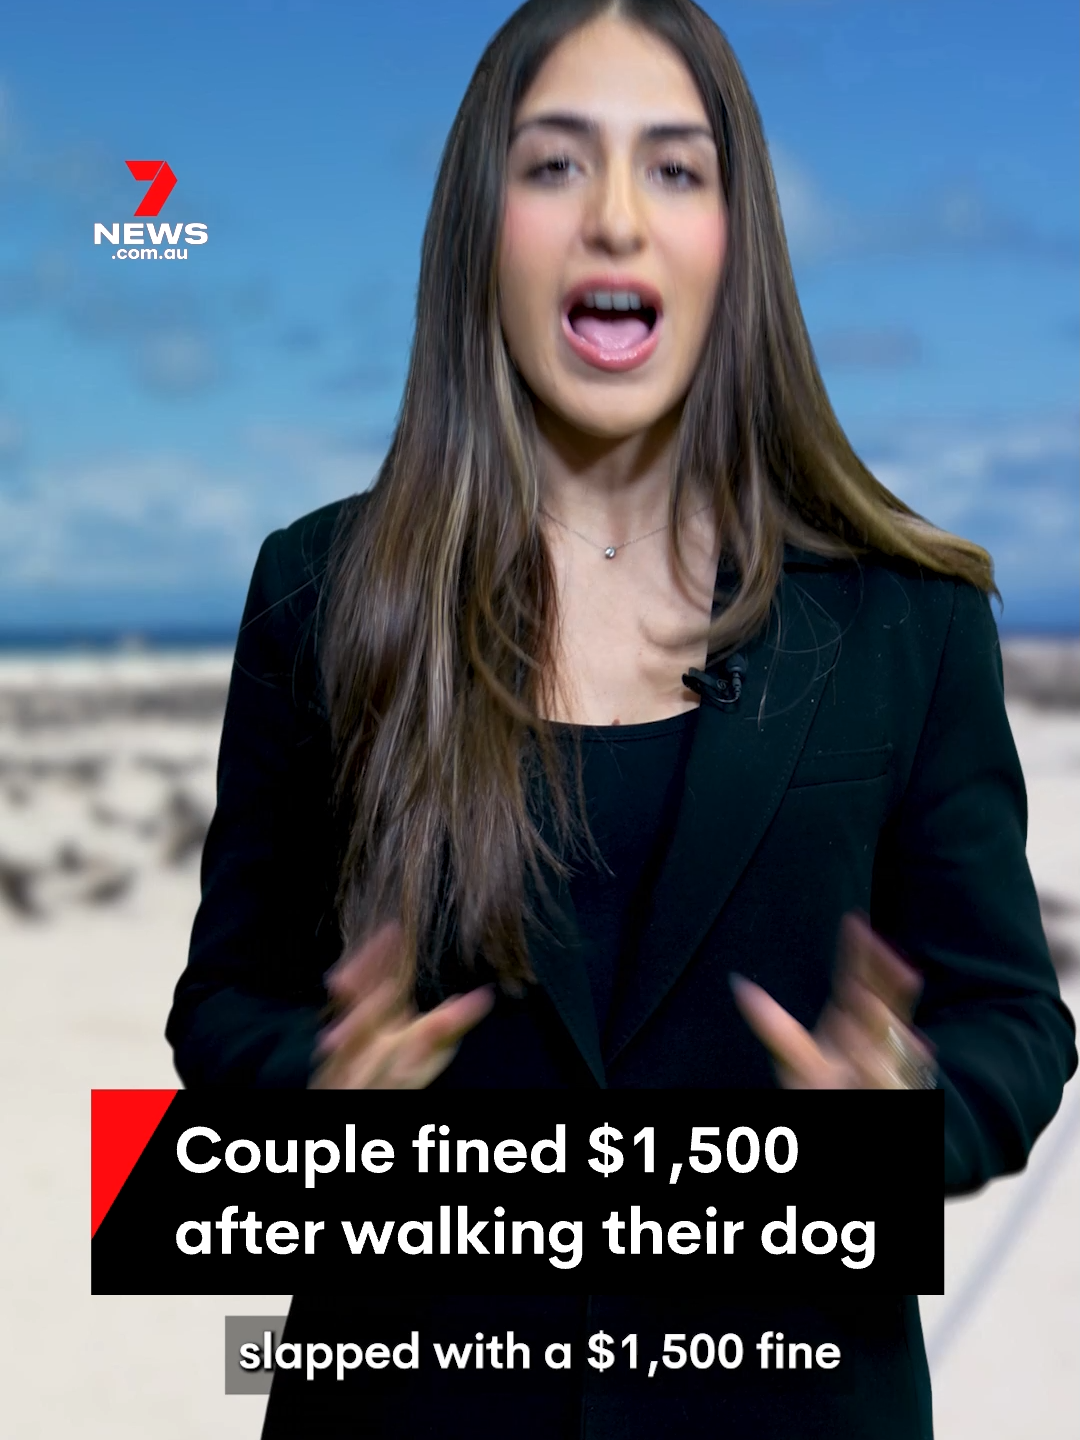 A couple in Queensland have been handed a $1,500 fine for walking their dog on a protected beach in the Great Barrier Reef National Park. The islet of Michaelmas Cay is considered to be one of the most important seabird breeding areas on the reef. #greatbarrierreef #fine #dogwalking #7NEWS